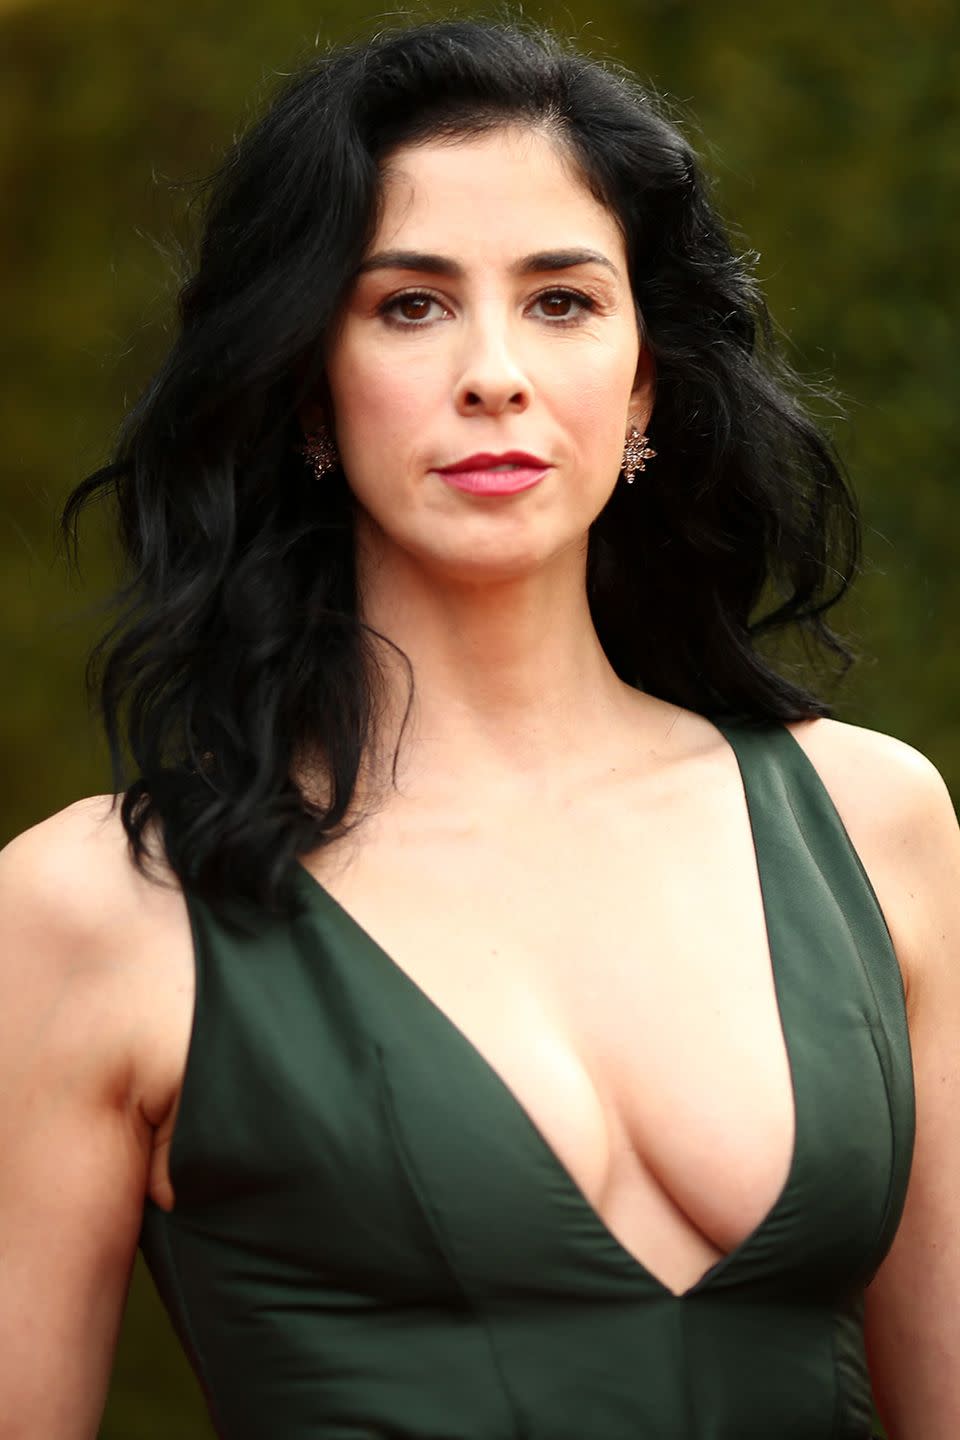 <p>The comedian and actress expressed her dislike for alcohol in a <a href="http://www.dailymail.co.uk/tvshowbiz/article-2734355/Sarah-Silverman-reveals-liquid-vaporiser-dashing-barefoot-collect-Emmy-gushing-My-Mr-Fancypants-Sheen.html" rel="nofollow noopener" target="_blank" data-ylk="slk:red carpet interview" class="link rapid-noclick-resp">red carpet interview</a> at the 2014 Emmys where she tells E!'s Giuliana Rancic, "I don't drink because it gives me a stomach ache," and further explaining "I try all the time, it looks good and I feel like I would have fun being drunk, but I have a Jewish stomach."</p>